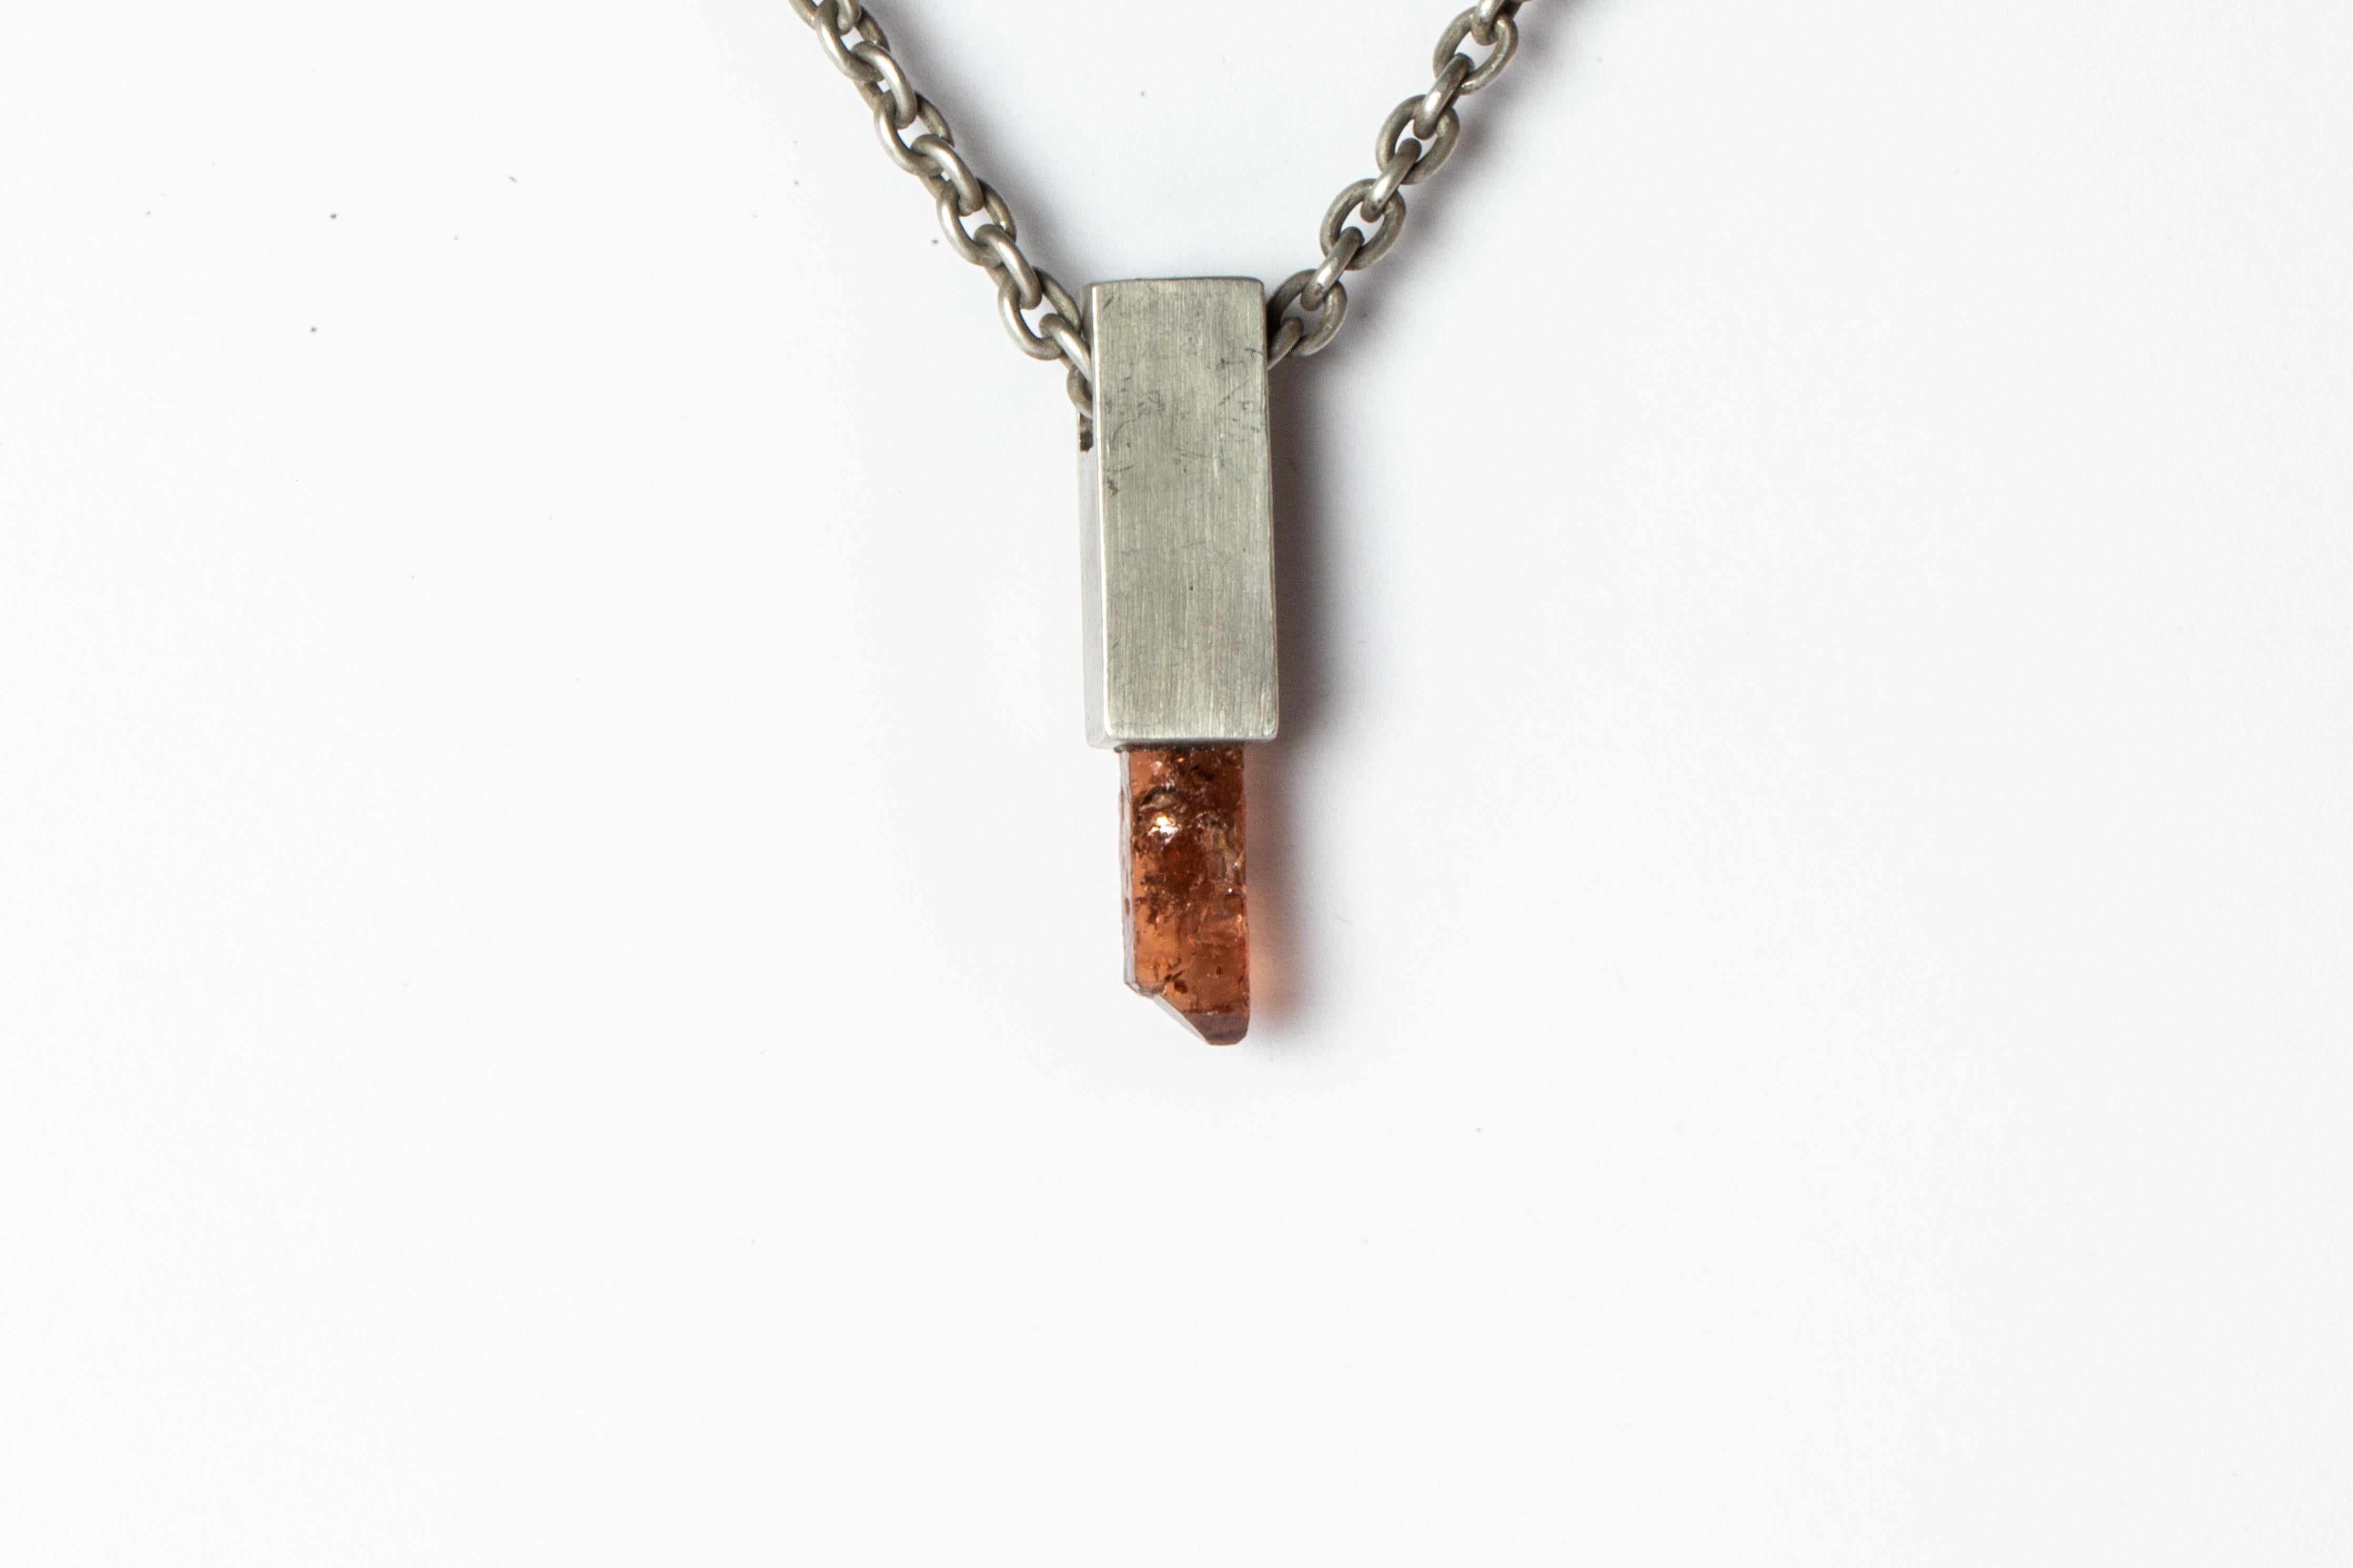 Pendant necklace in the cuboid shape made in dirty sterling silver and a rough of zircon. It comes on 74 cm sterling silver chain.
The Talisman series is an exploration into the power of natural crystals. The crystals used in these pieces are